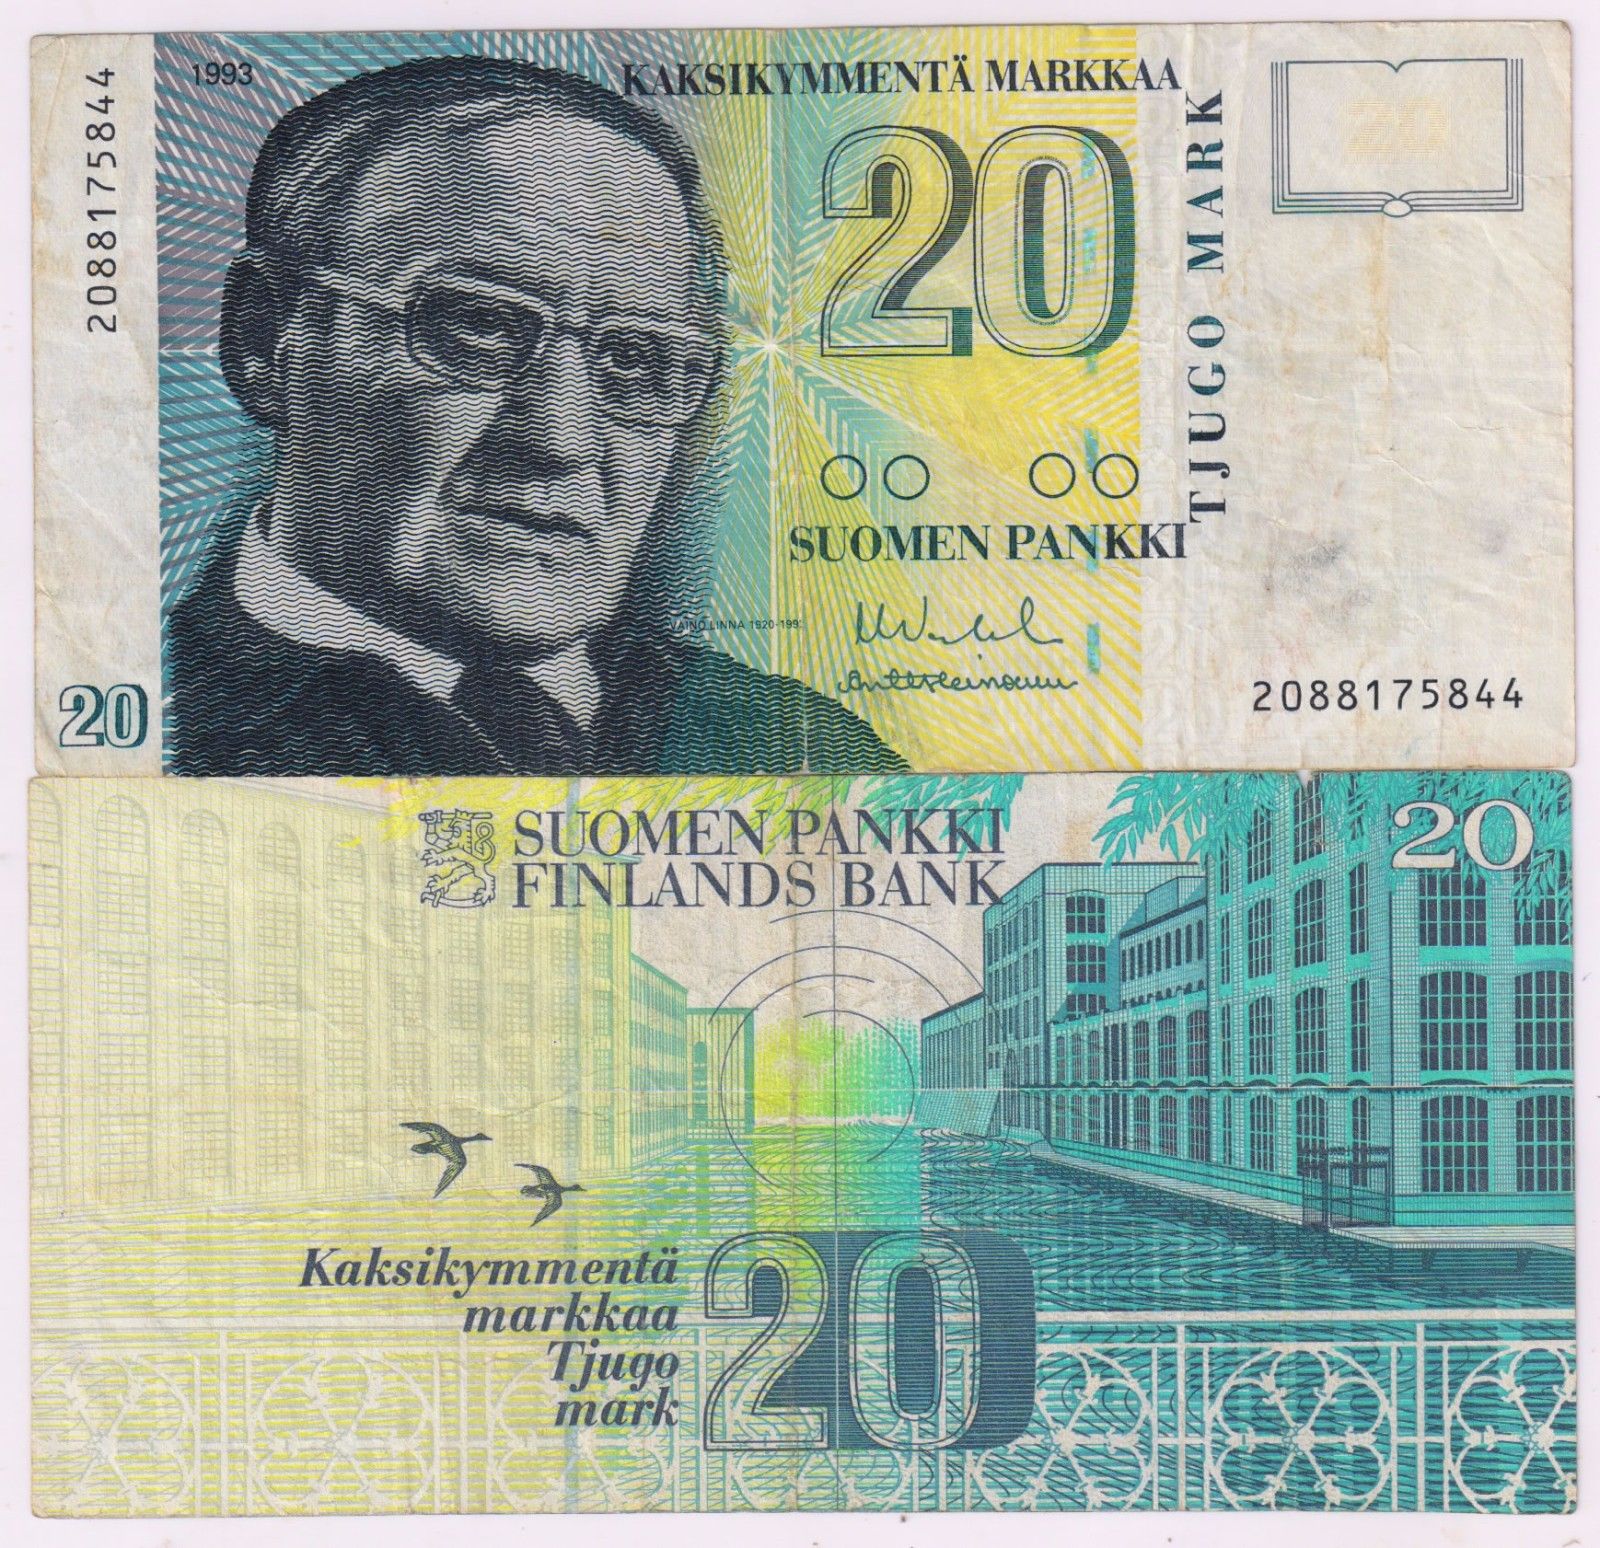 Finland 20 markkaa 1993 VF currency note KB Coins & Currencies